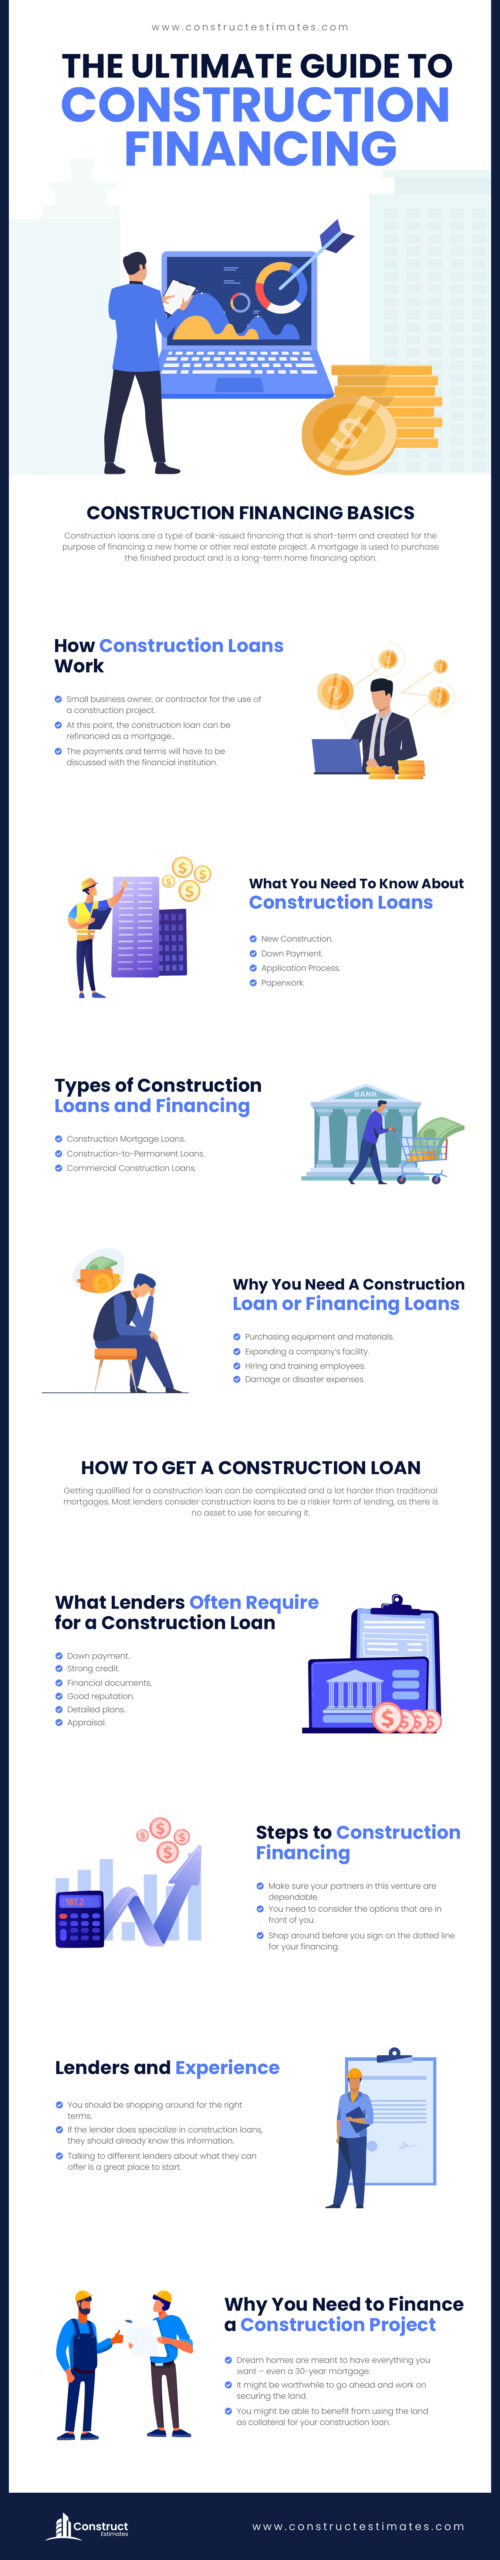 Construction Loans and Financing